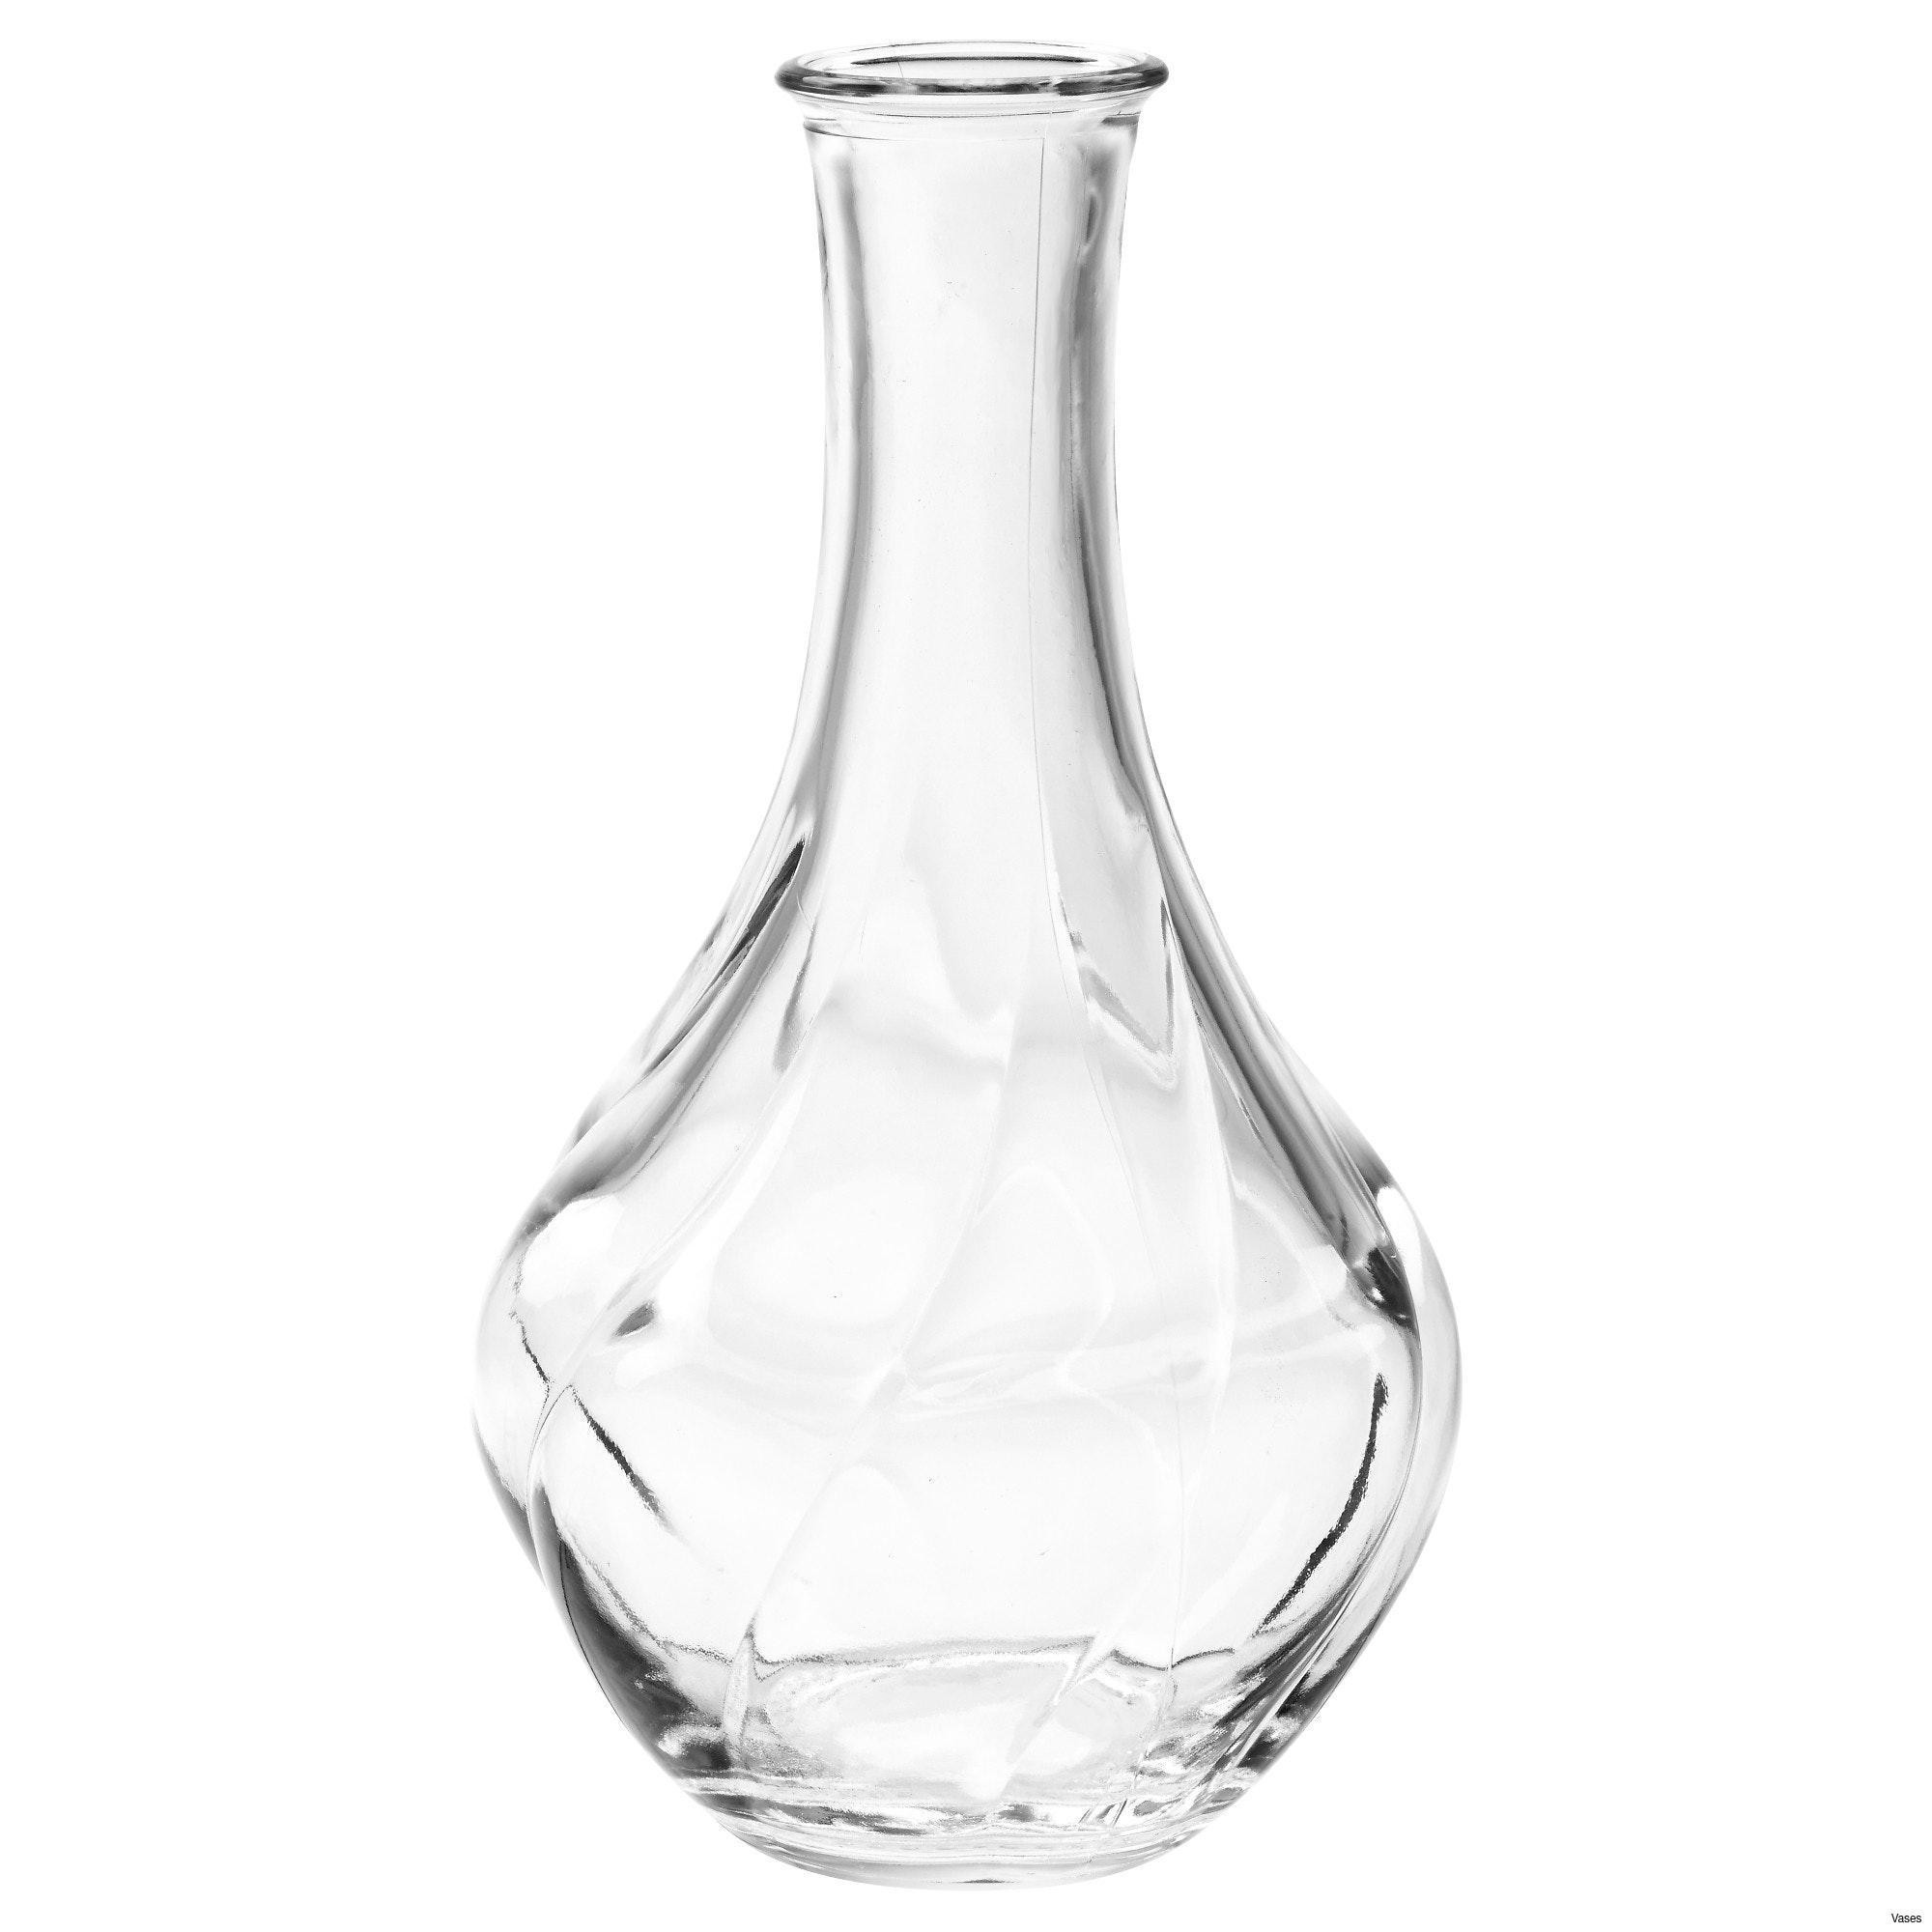 14 Ideal Tall Glass Vase with Lid 2024 free download tall glass vase with lid of glass vases with lids image living room glass vases fresh clear vase within glass vases with lids image living room glass vases fresh clear vase 0d tags amazing a